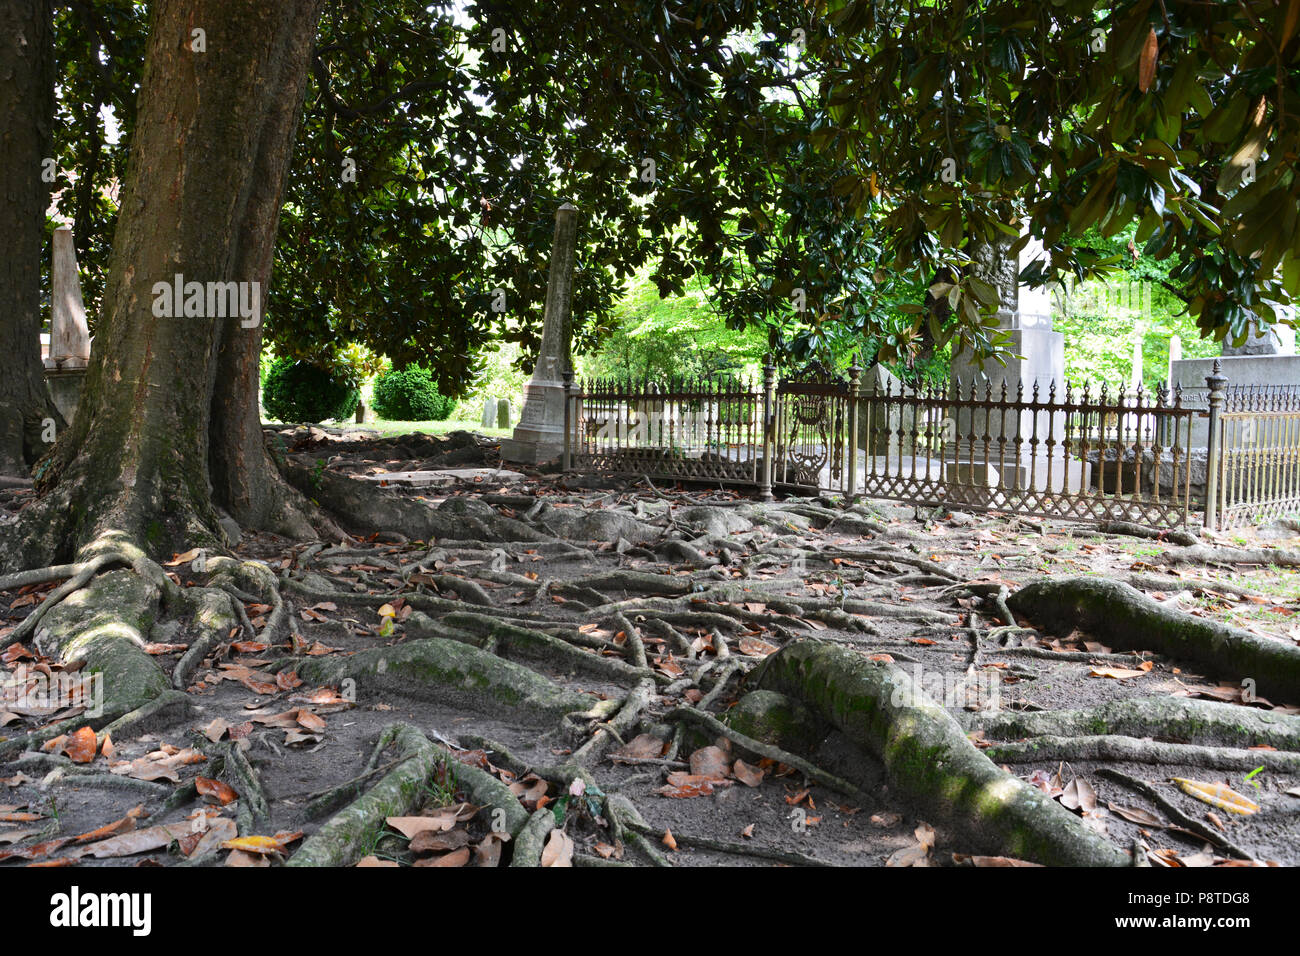 Roots from 100+ year-old magnolia trees carpet the ground in the churchyard cemetery outside St. Paul's Episcopal Church in Edenton North Carolina Stock Photo